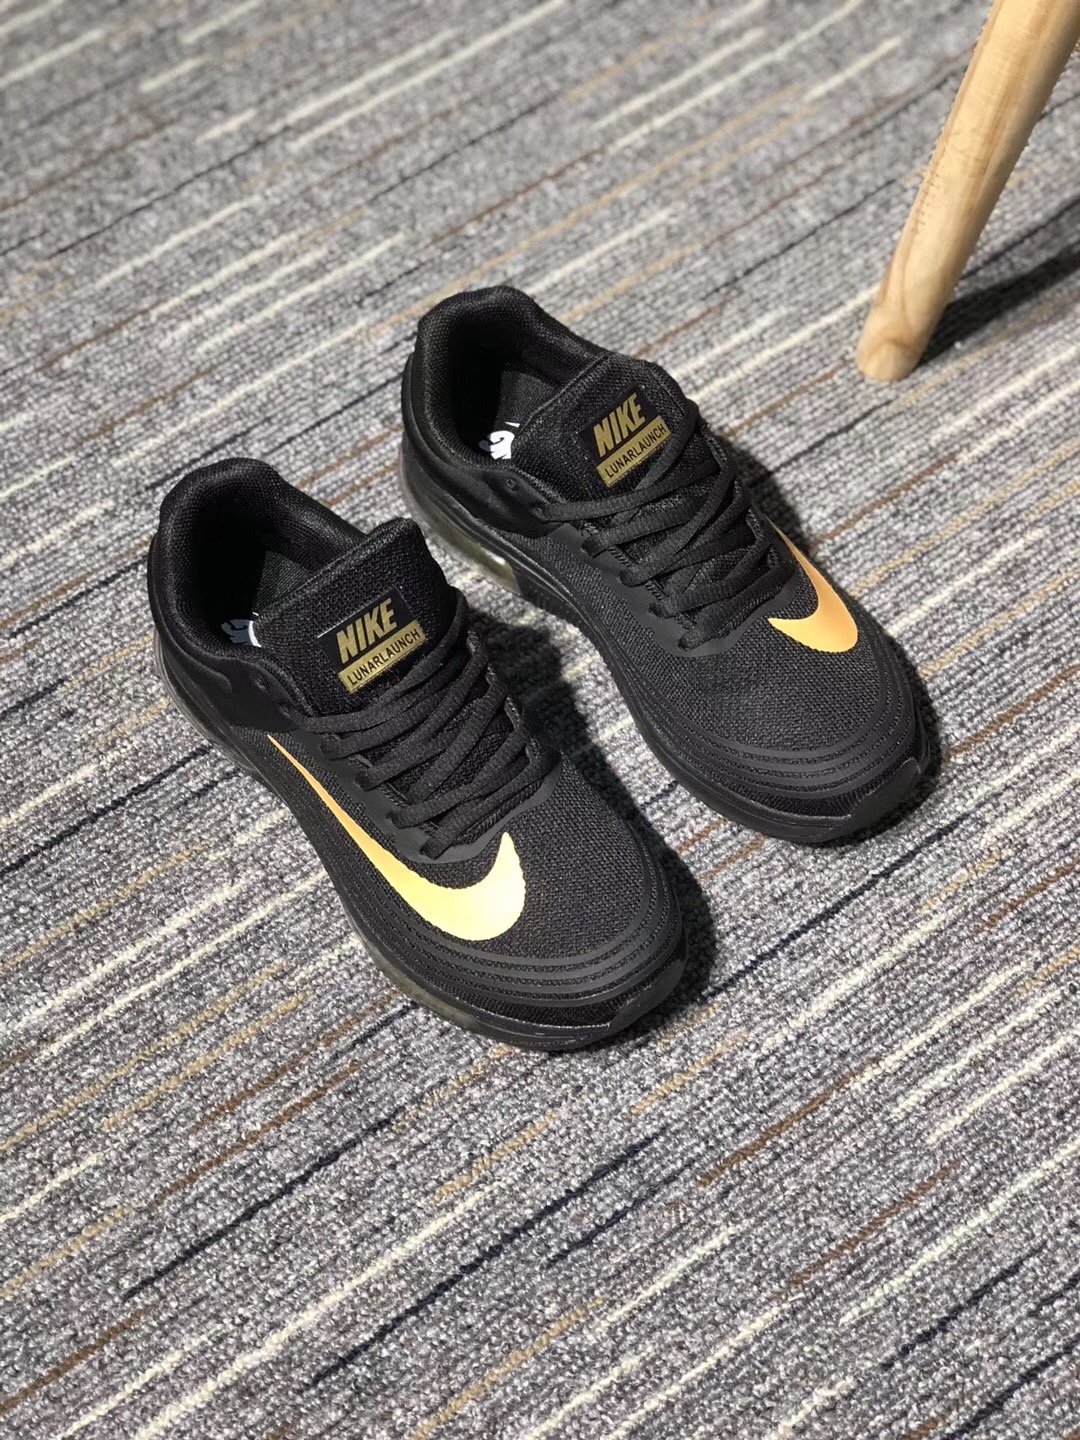 Nike Air Max 2018 Flyknit Black Gold Running Shoes - Click Image to Close